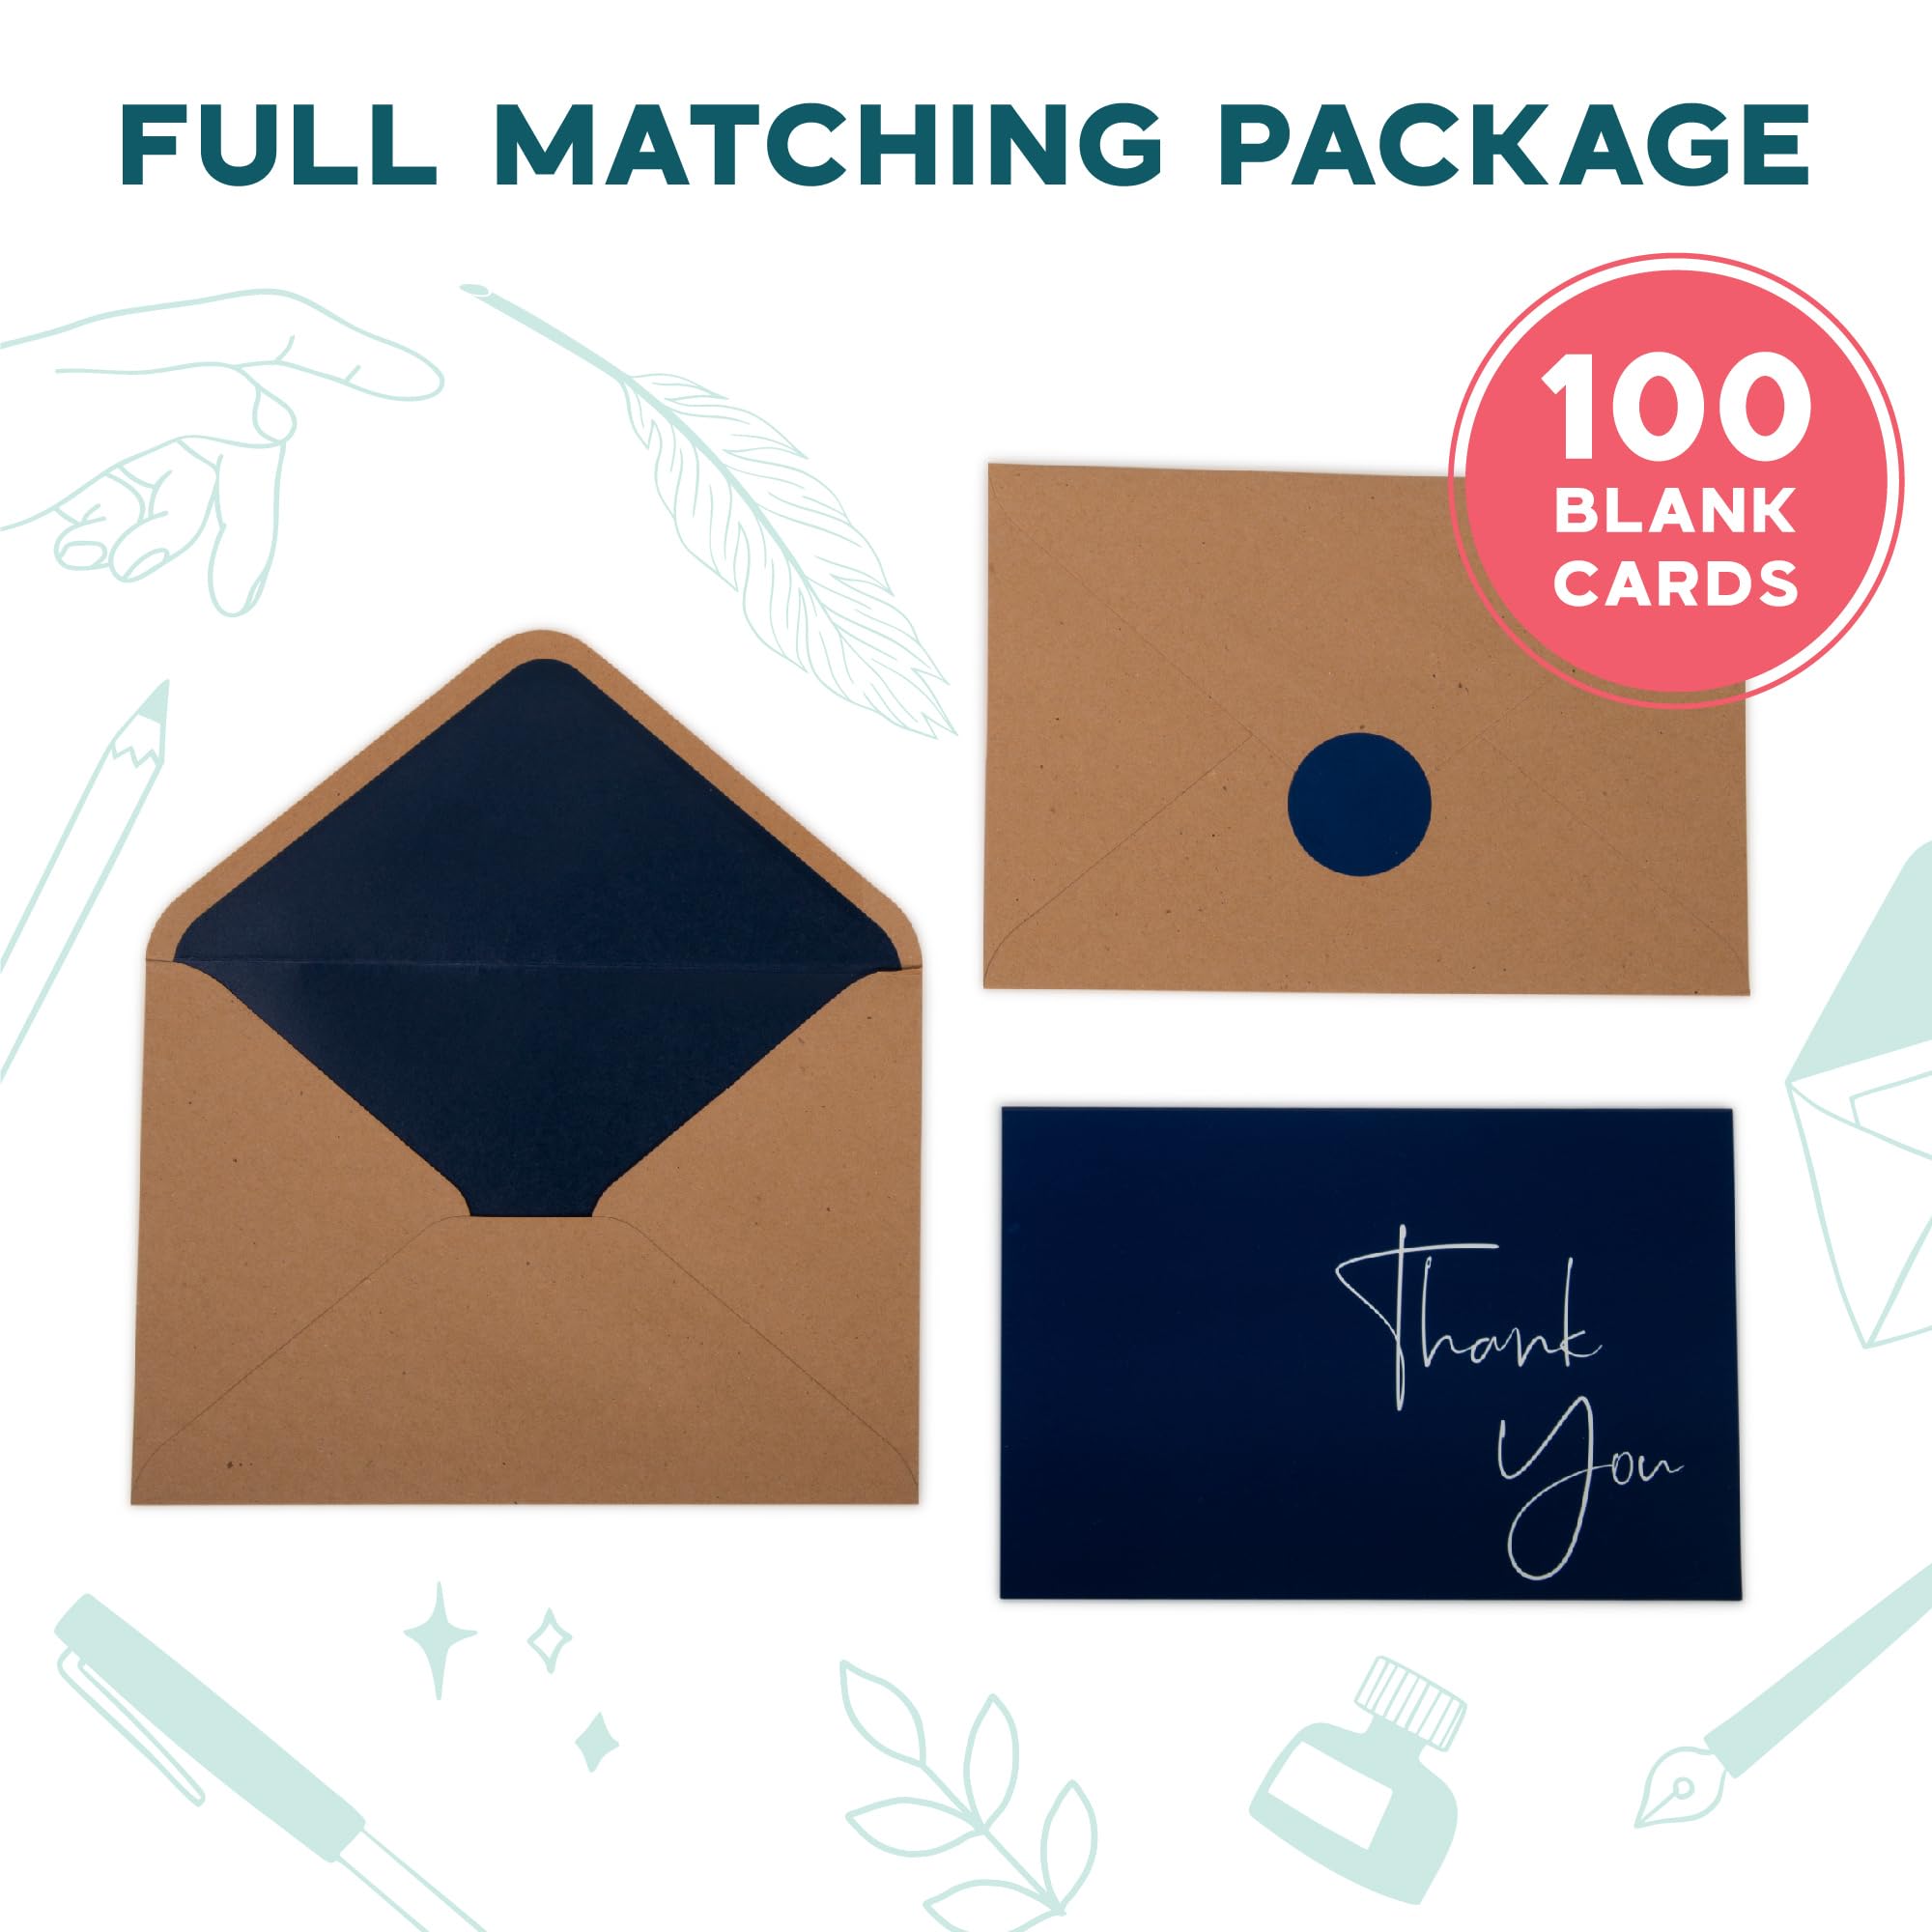 VNS Creations 100 pack Thank You Cards with Envelopes & Stickers - Classy 4x6 Blank Thank You Cards Bulk Box Set - Large Thank You Notes for Wedding, Small Business, Baby & Bridal Shower (Navy Blue)